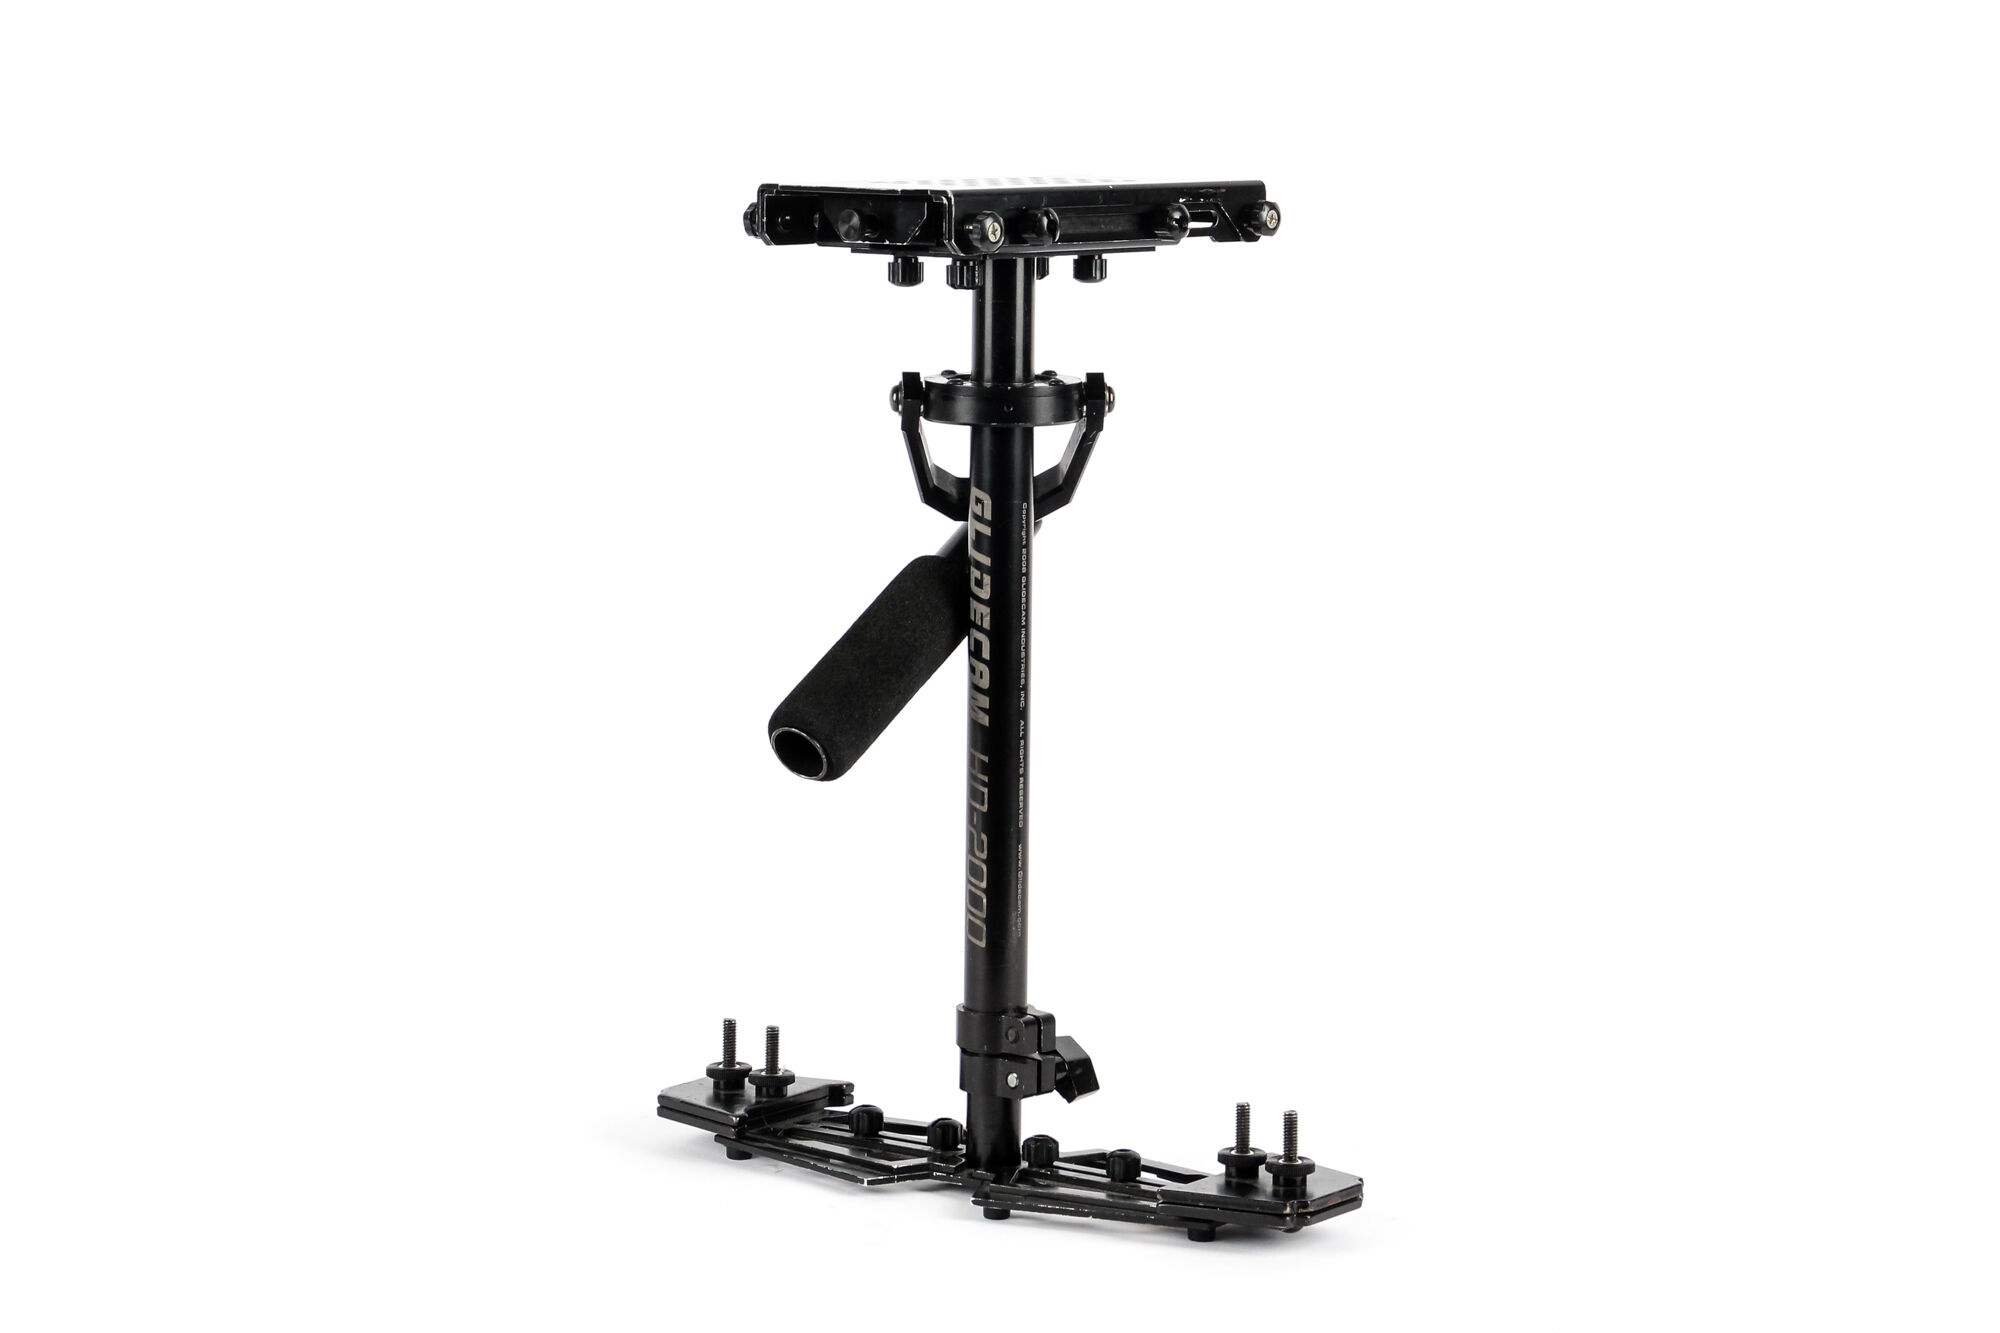 glidecam hd2000 stabiliser system (condition: well used)